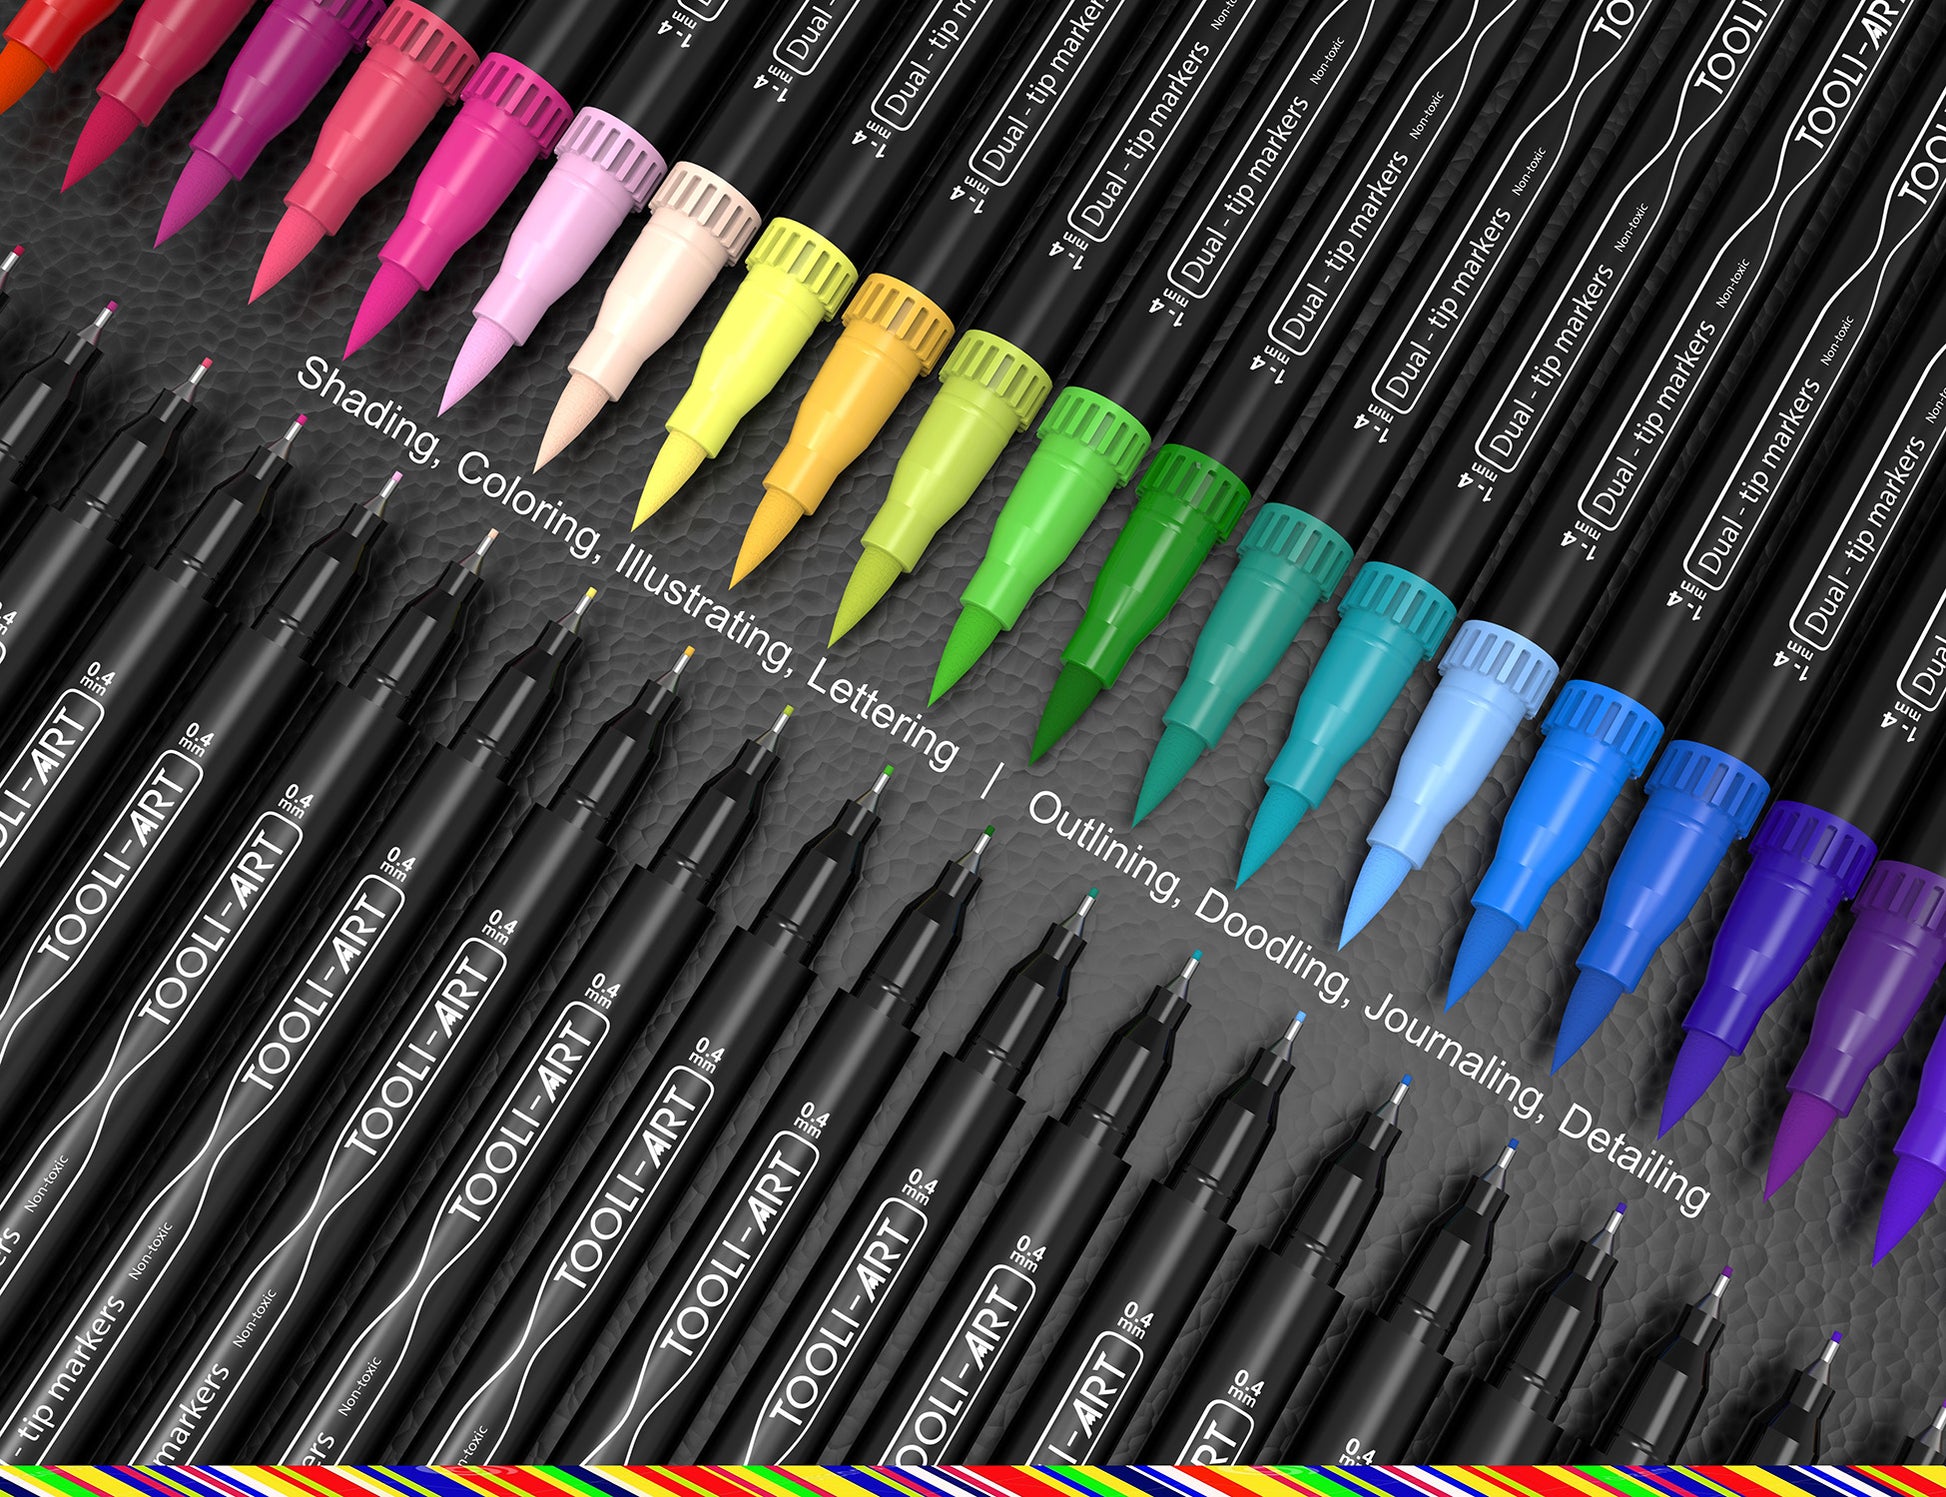  Lyra Aqua Brush Duo Brush Markers - Set of 36 Water-Based Brush  Pens for Artists of All Ages - Dual Tip Markers for Fine Details and Wide  Strokes - Durable Coloring